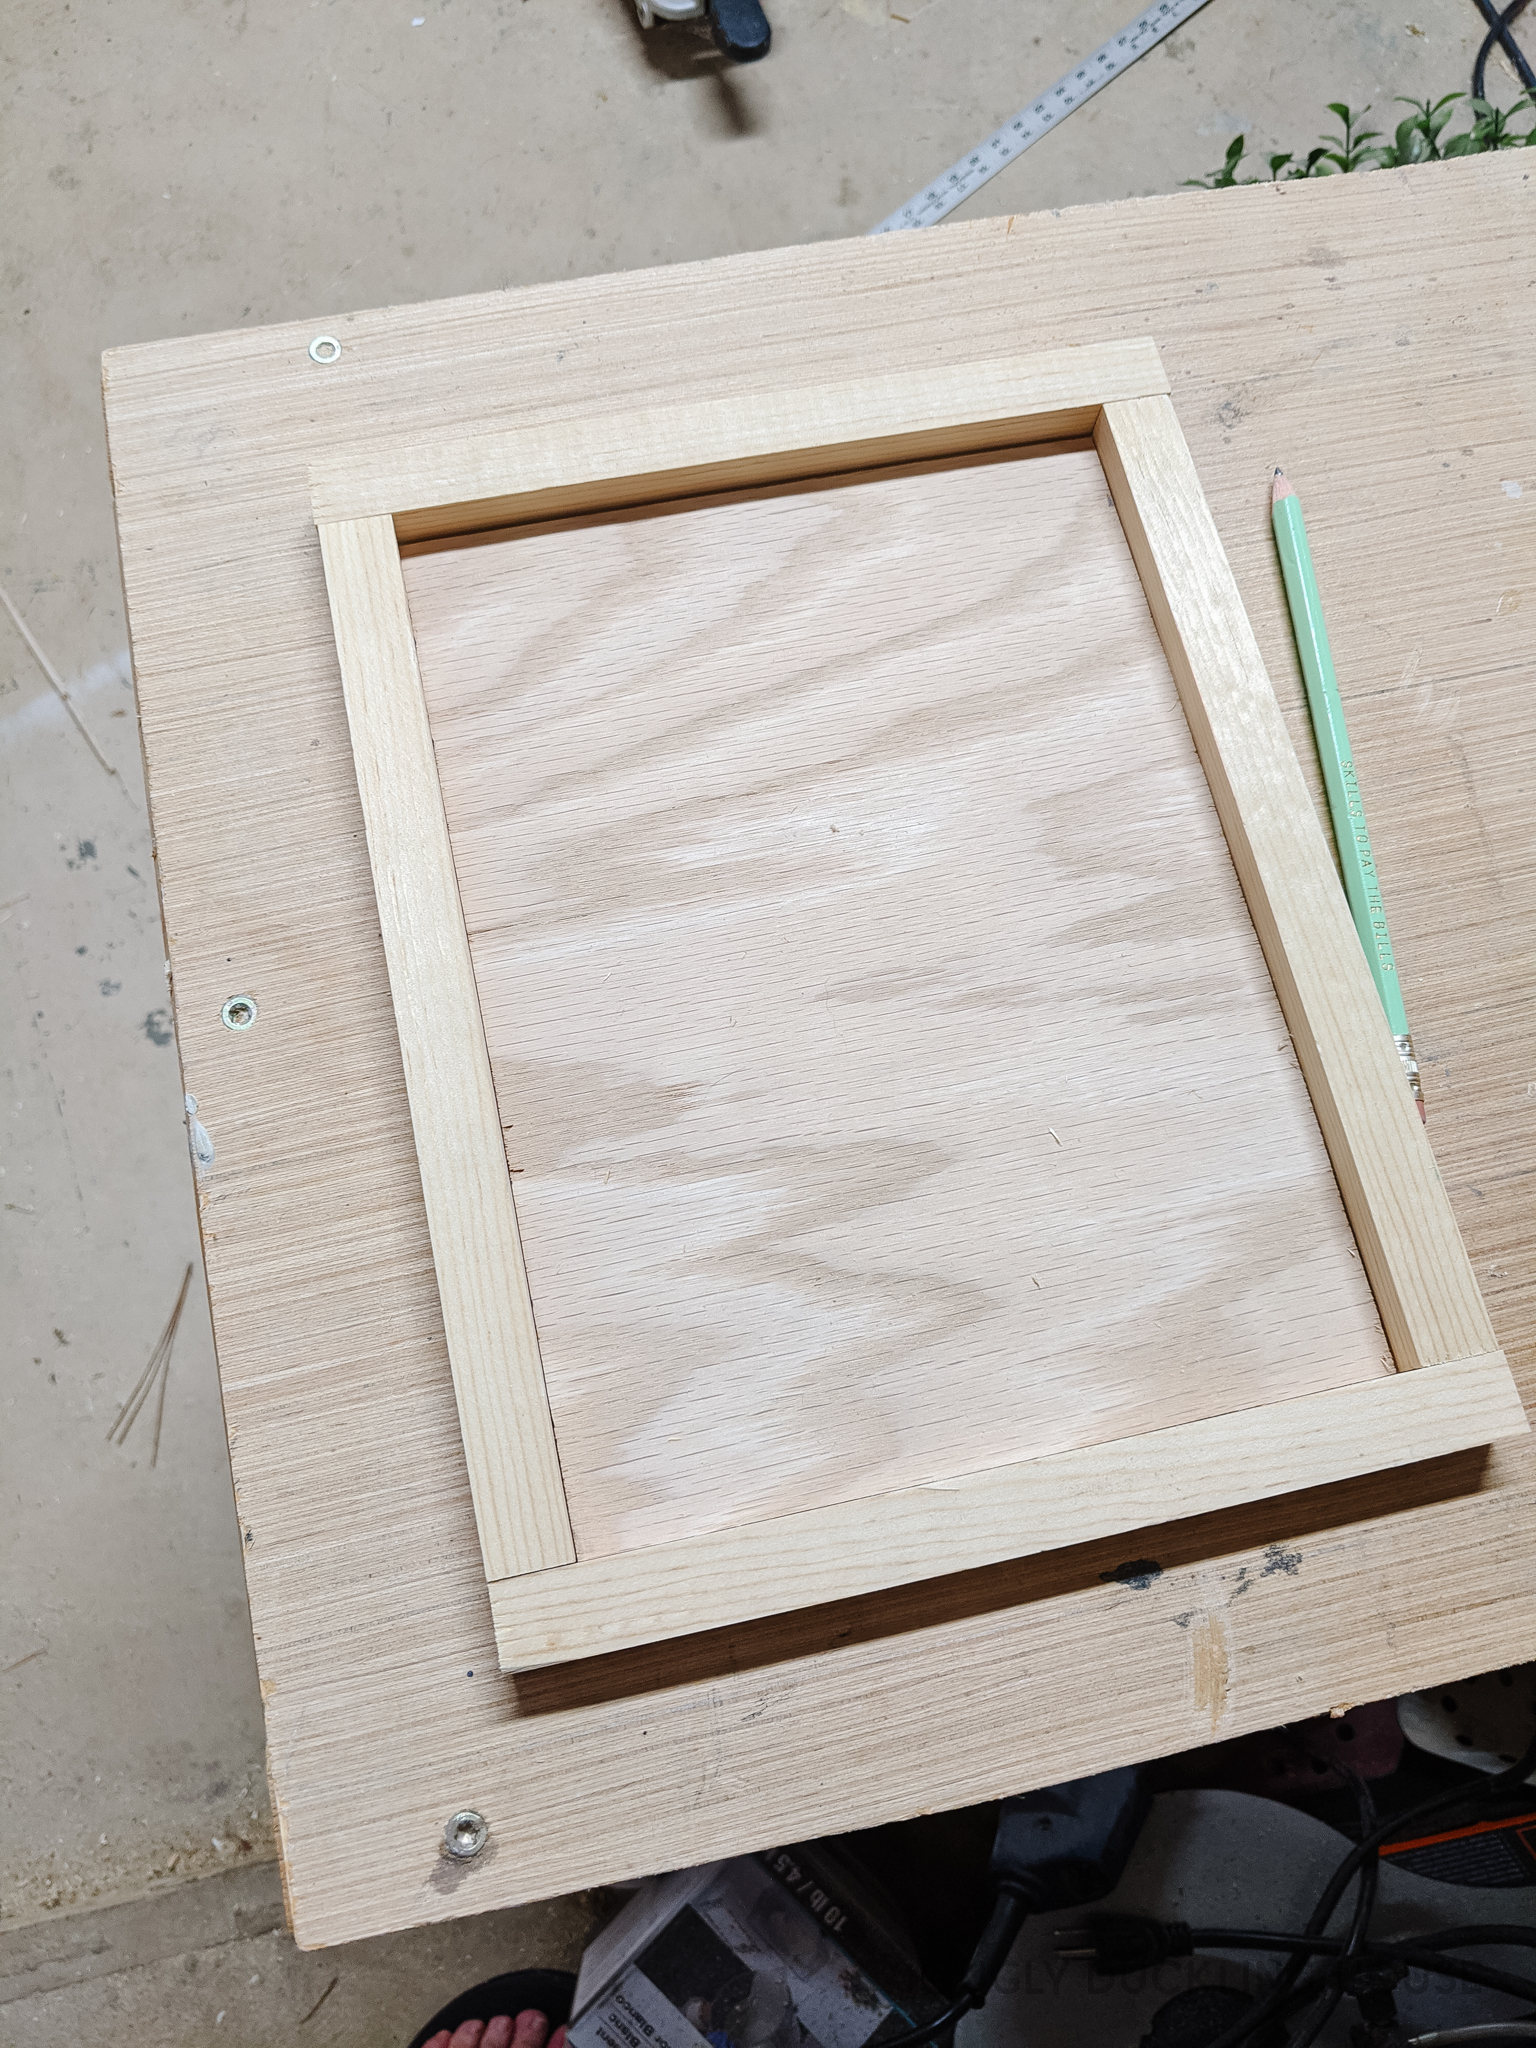 cut a frame to fit around the backer